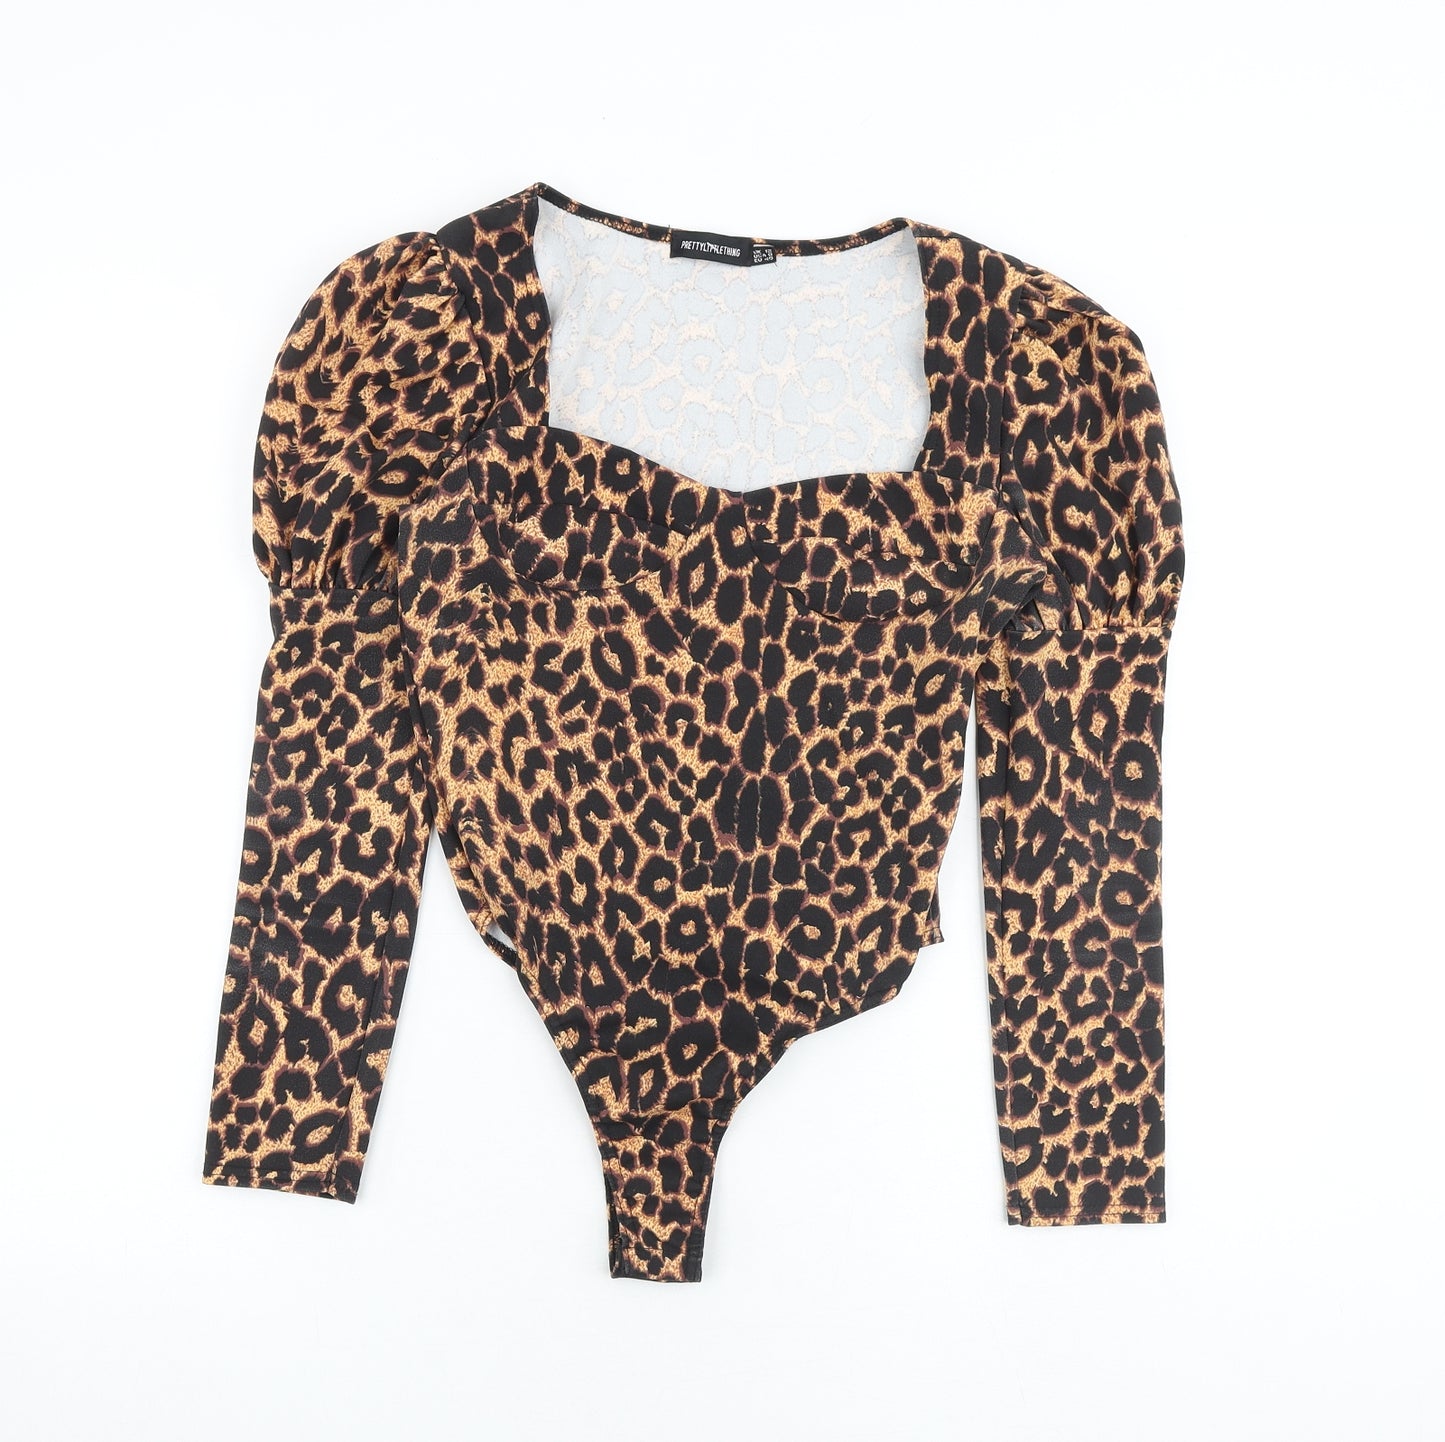 PRETTYLITTLETHING Womens Brown Animal Print Polyester Bodysuit One-Piece Size 12 Snap - Leopard Print